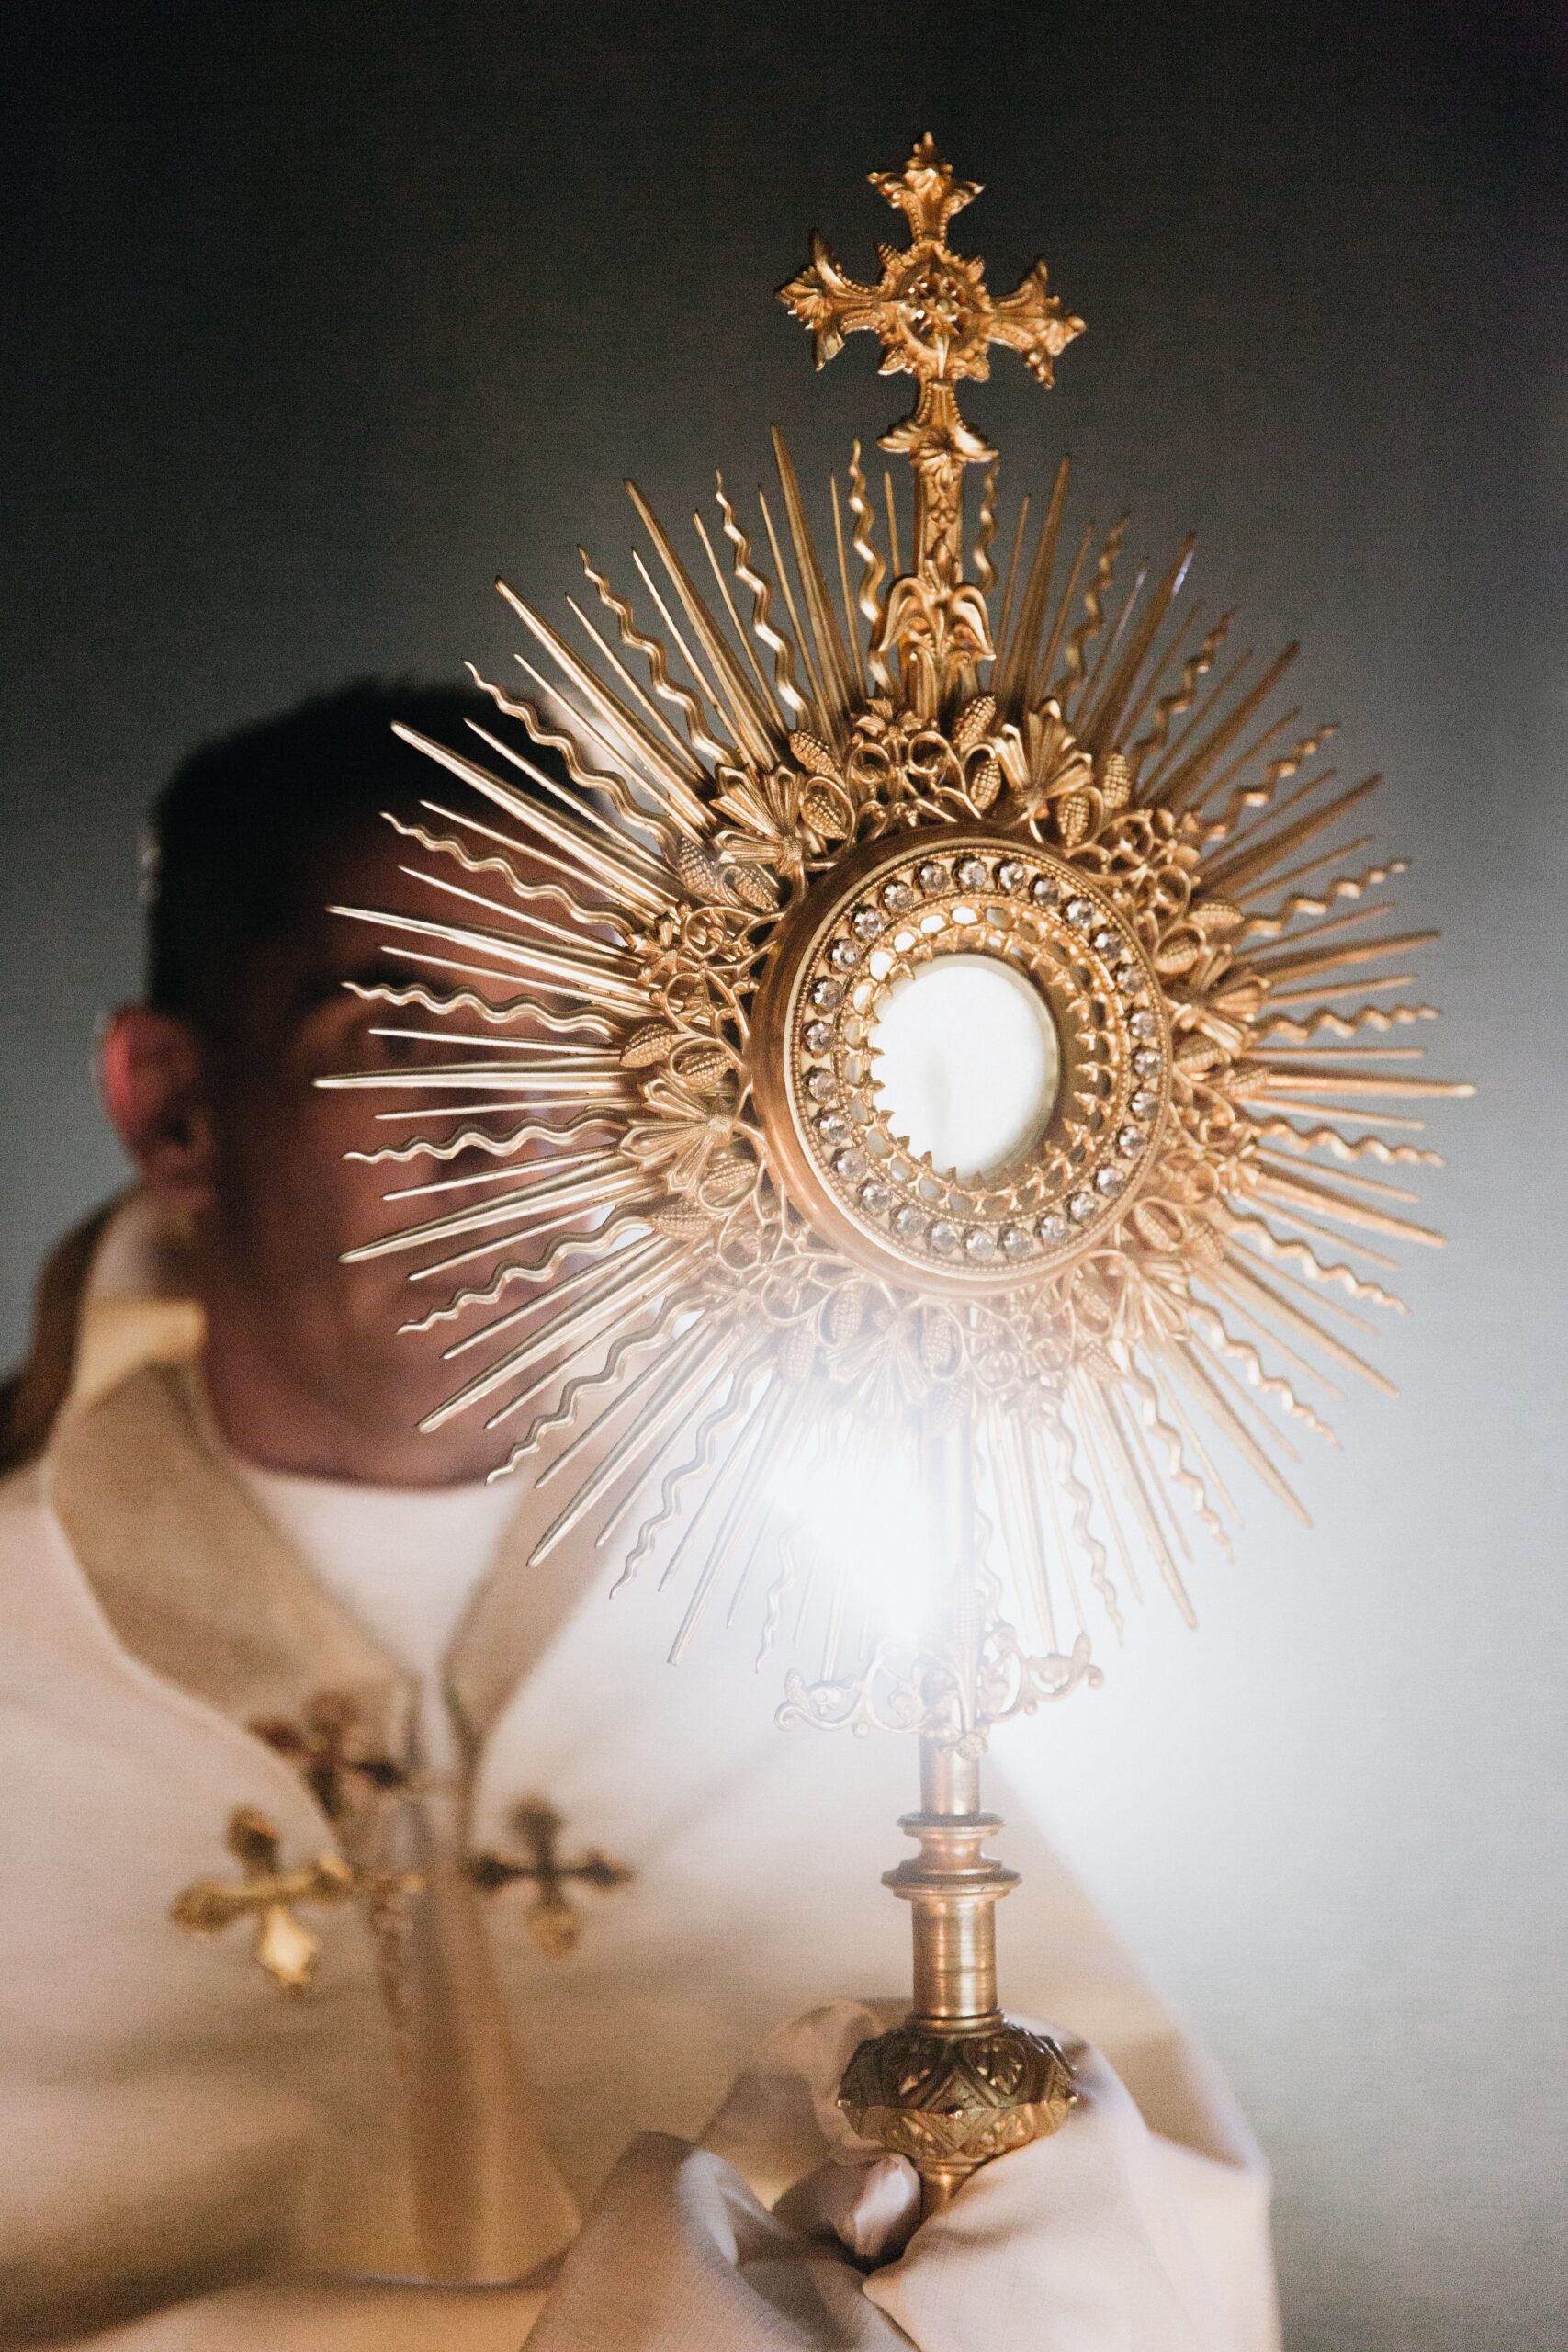 The Eucharist is a gift...not a right!